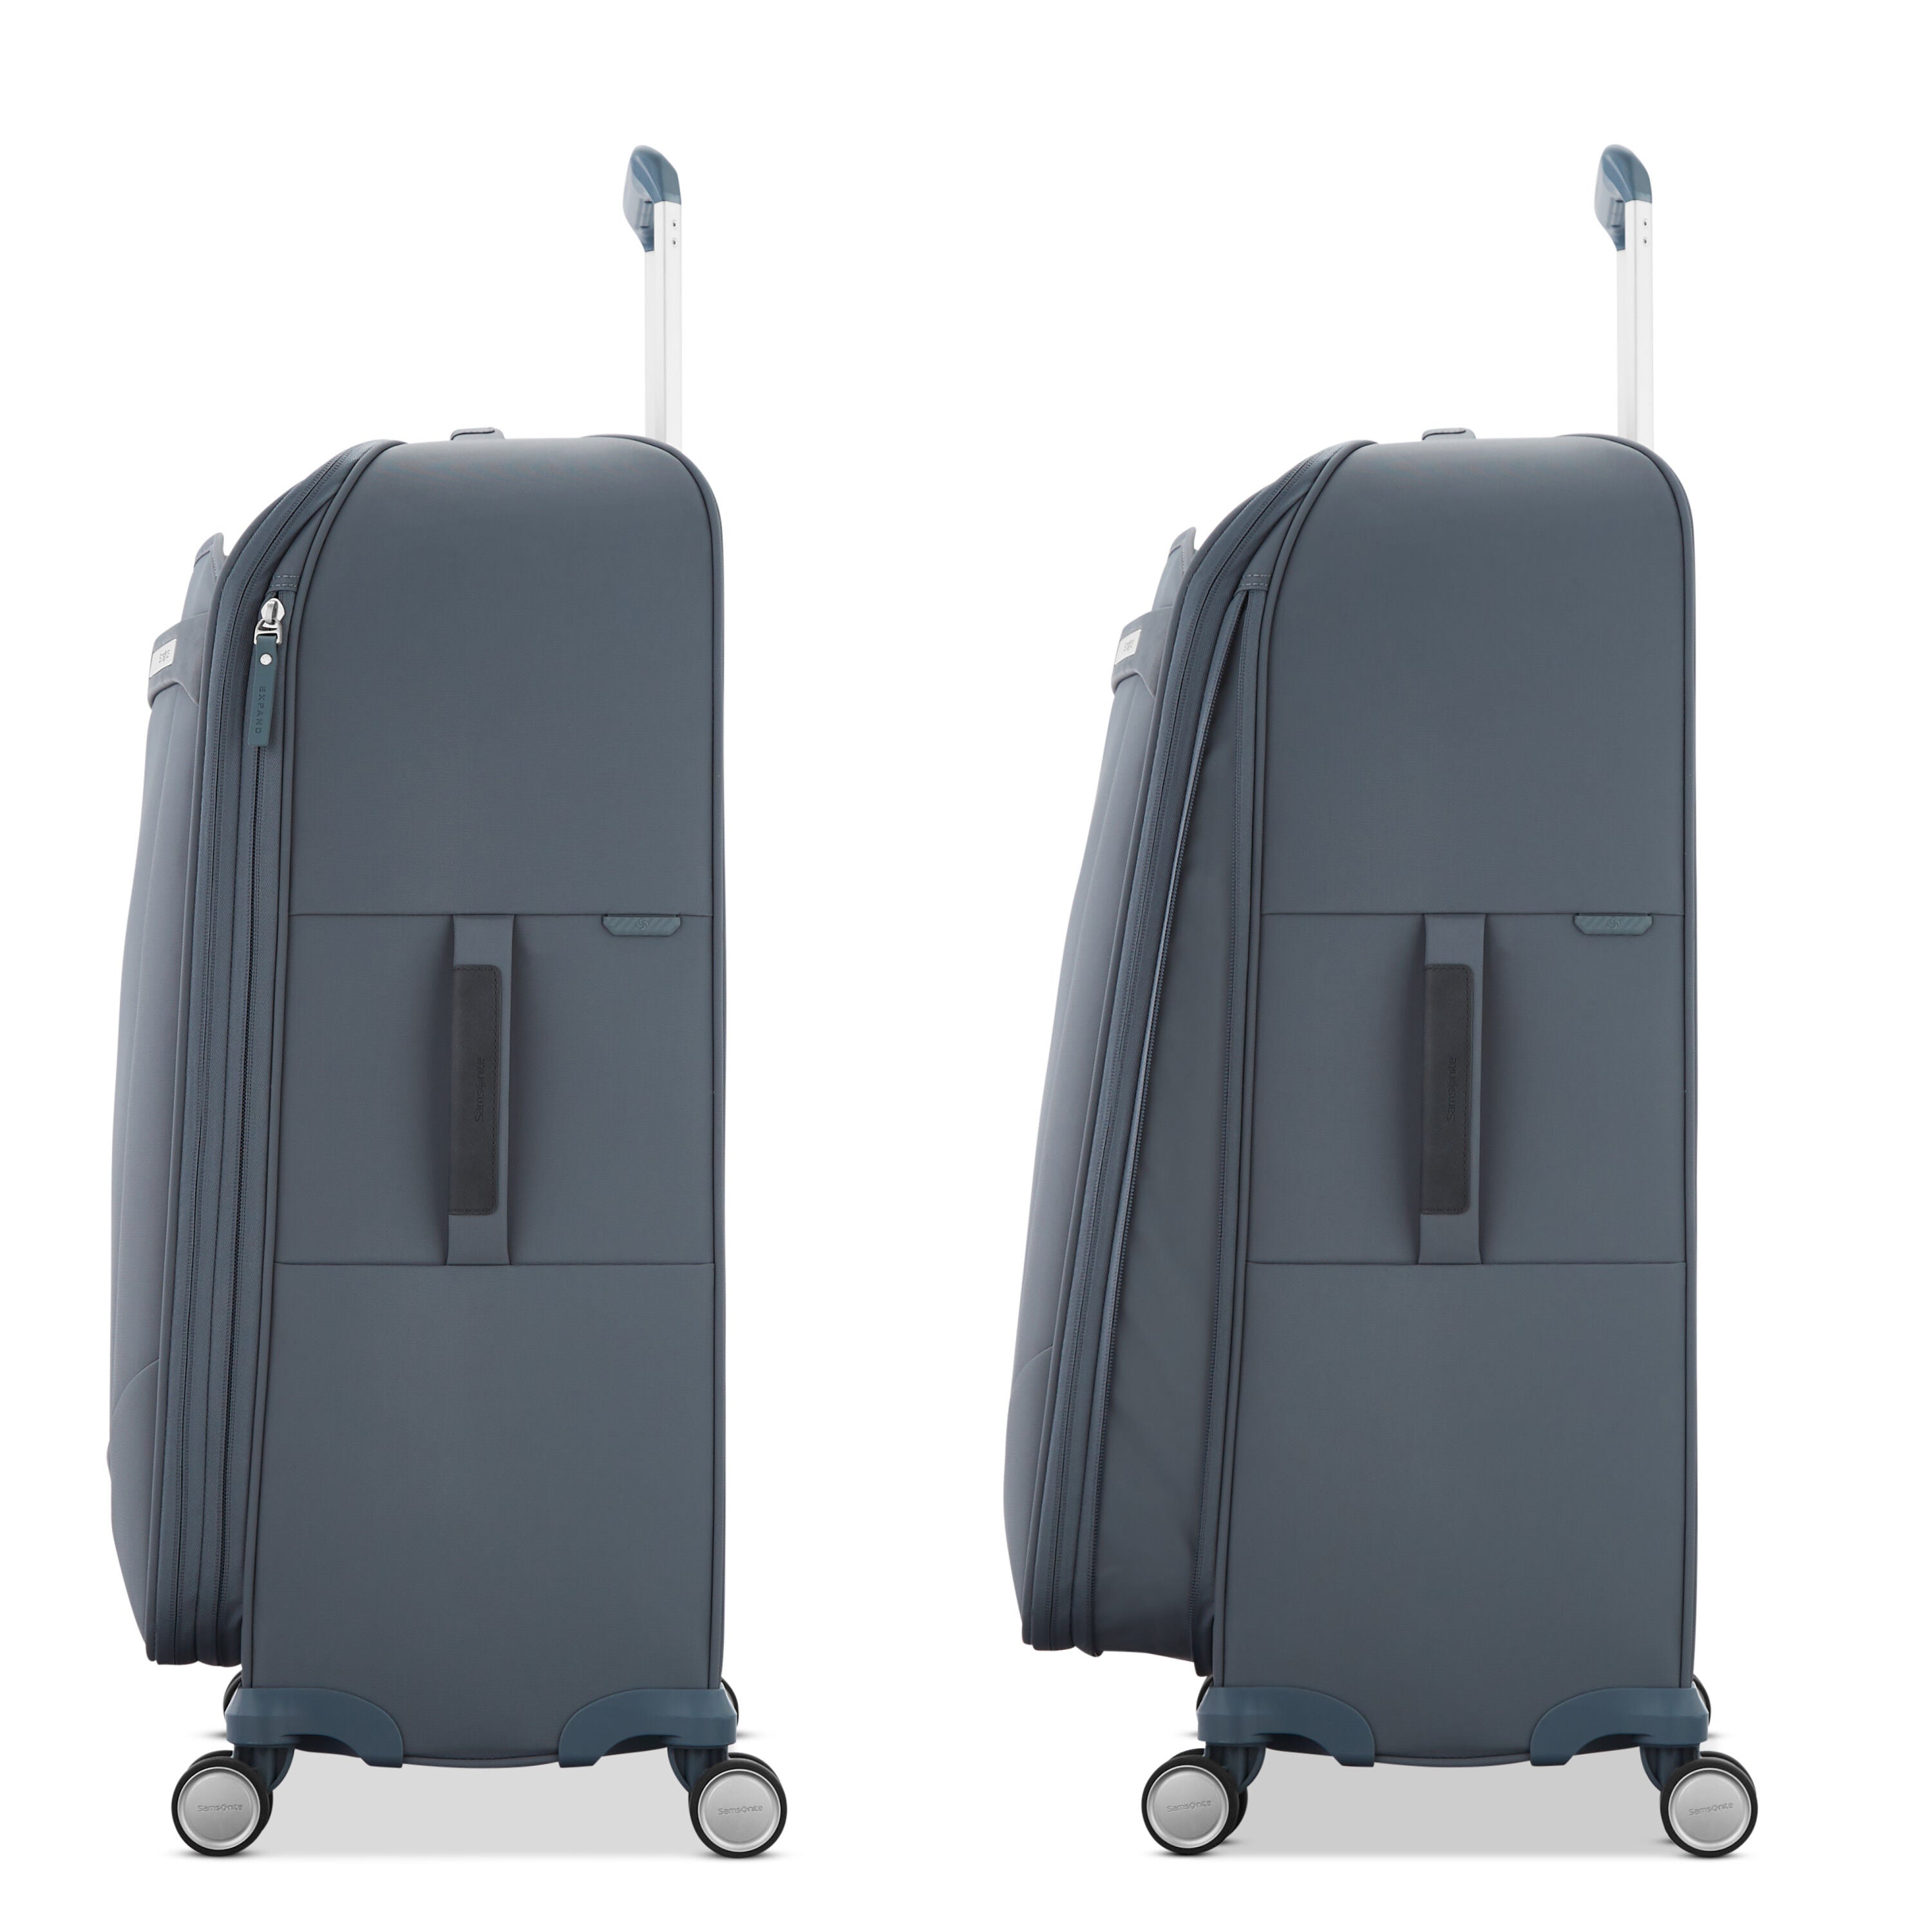 ELEVATION PLUS SOFTSIDE CARRY-ON SPINNER